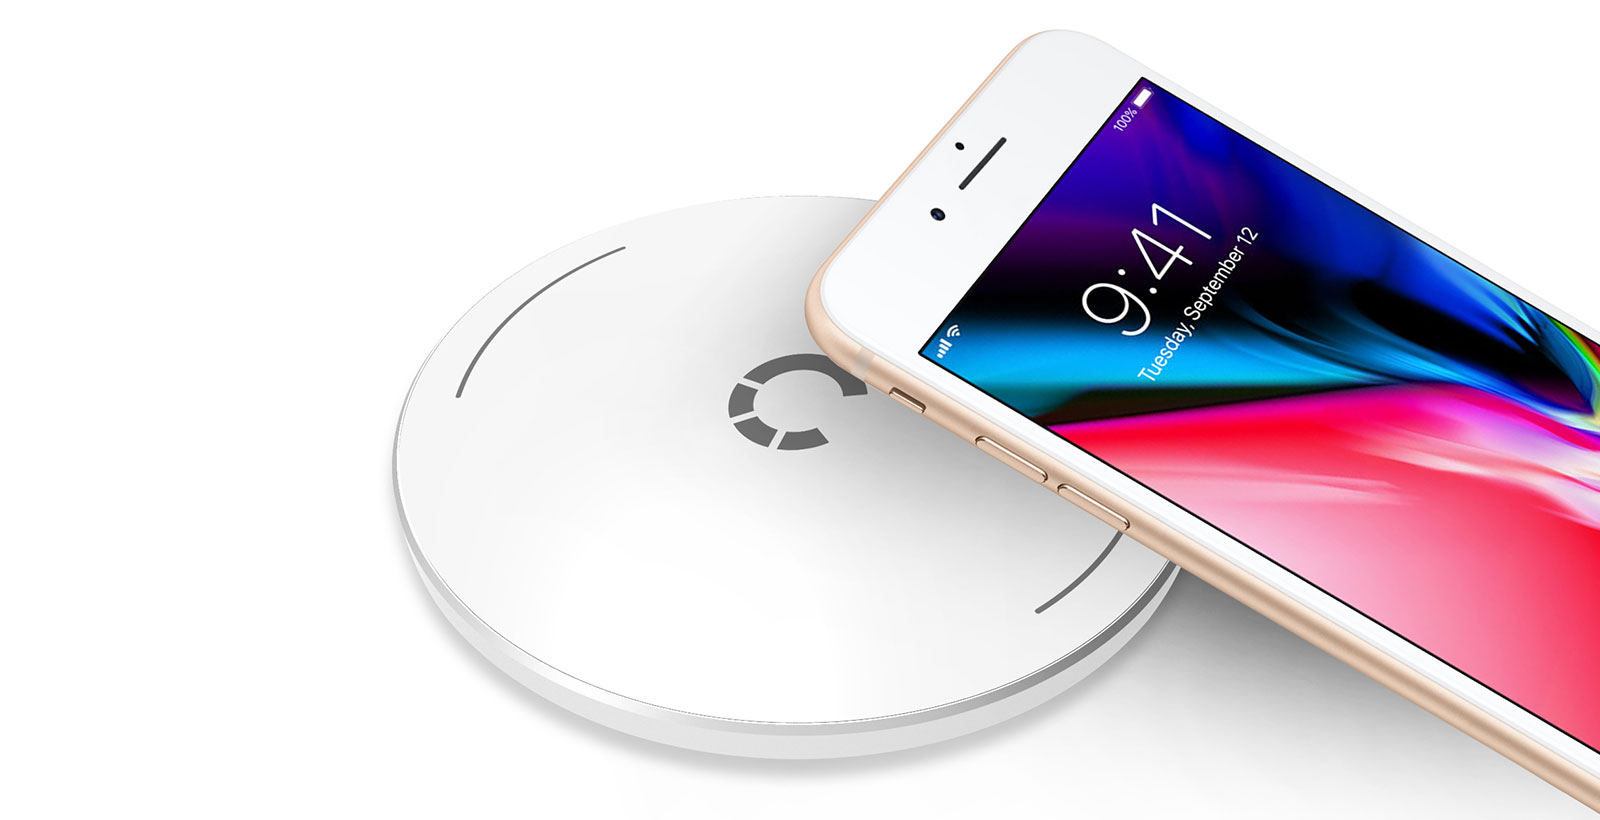 Why won't a wireless charger charge my phone? – Pickr